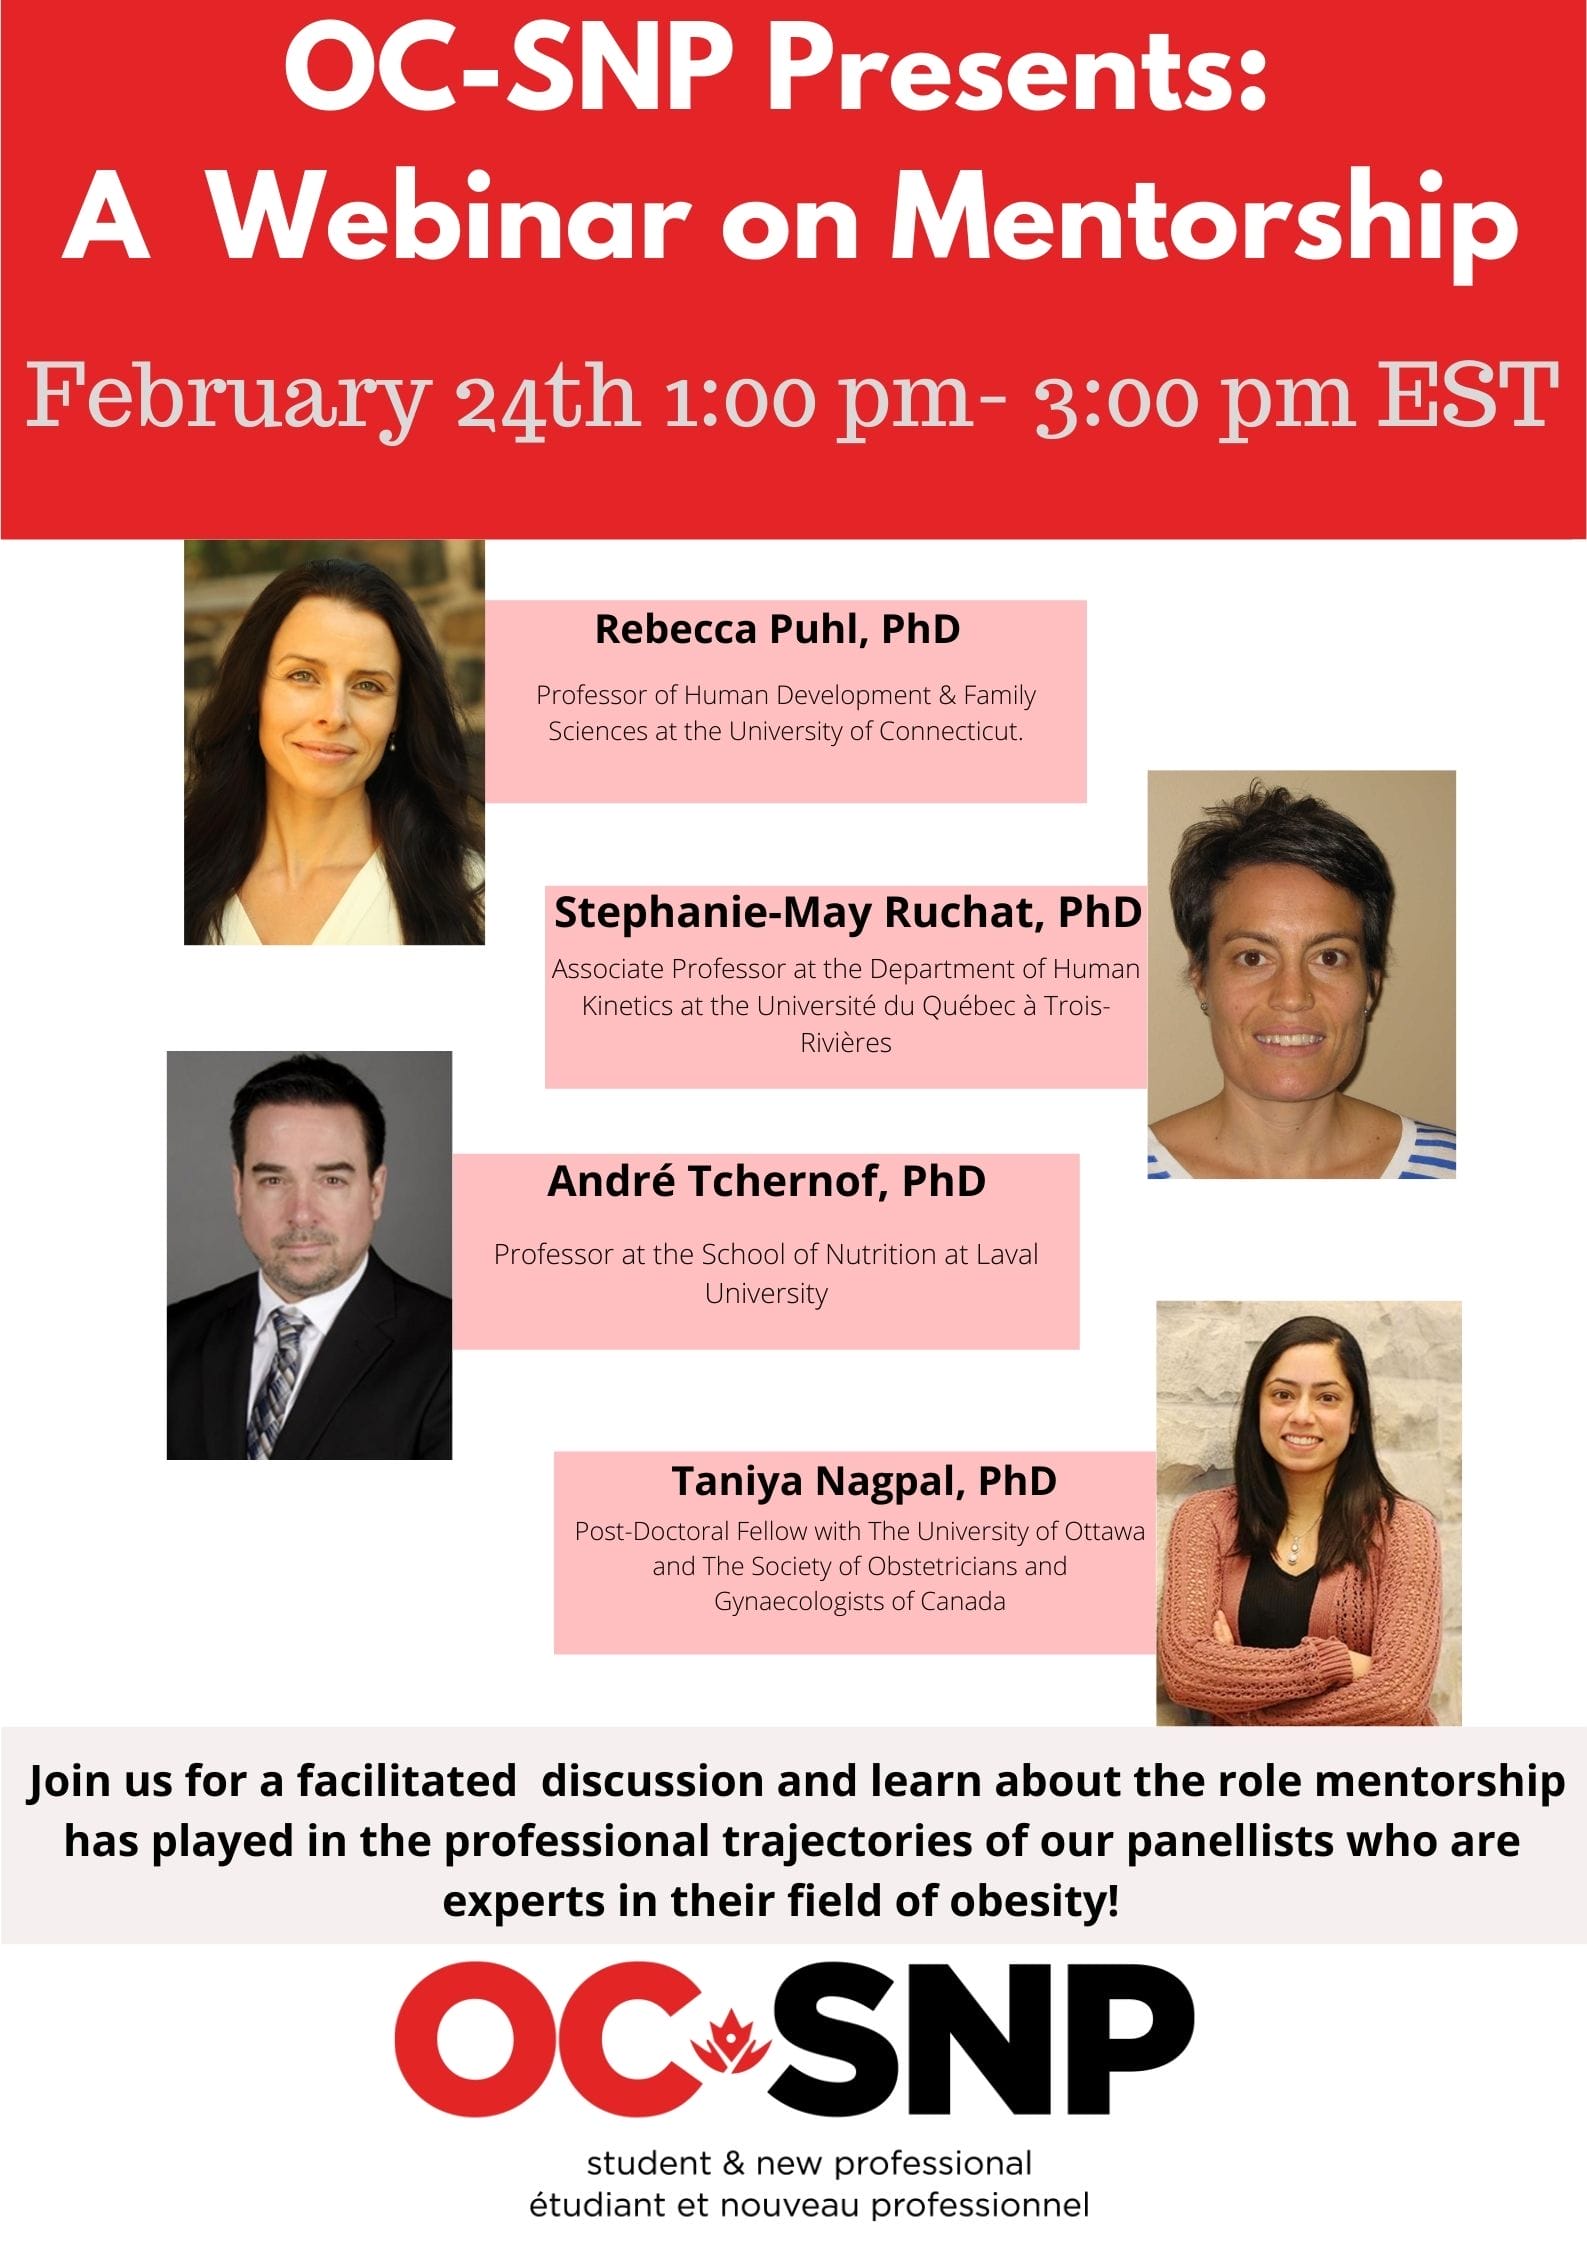 Promotional flyer for a webinar on "the professional challenges of our panelists" featuring photos and titles of three speakers, scheduled for 1:00 pm - 3:00 pm est, emphasizing obesity discussions.